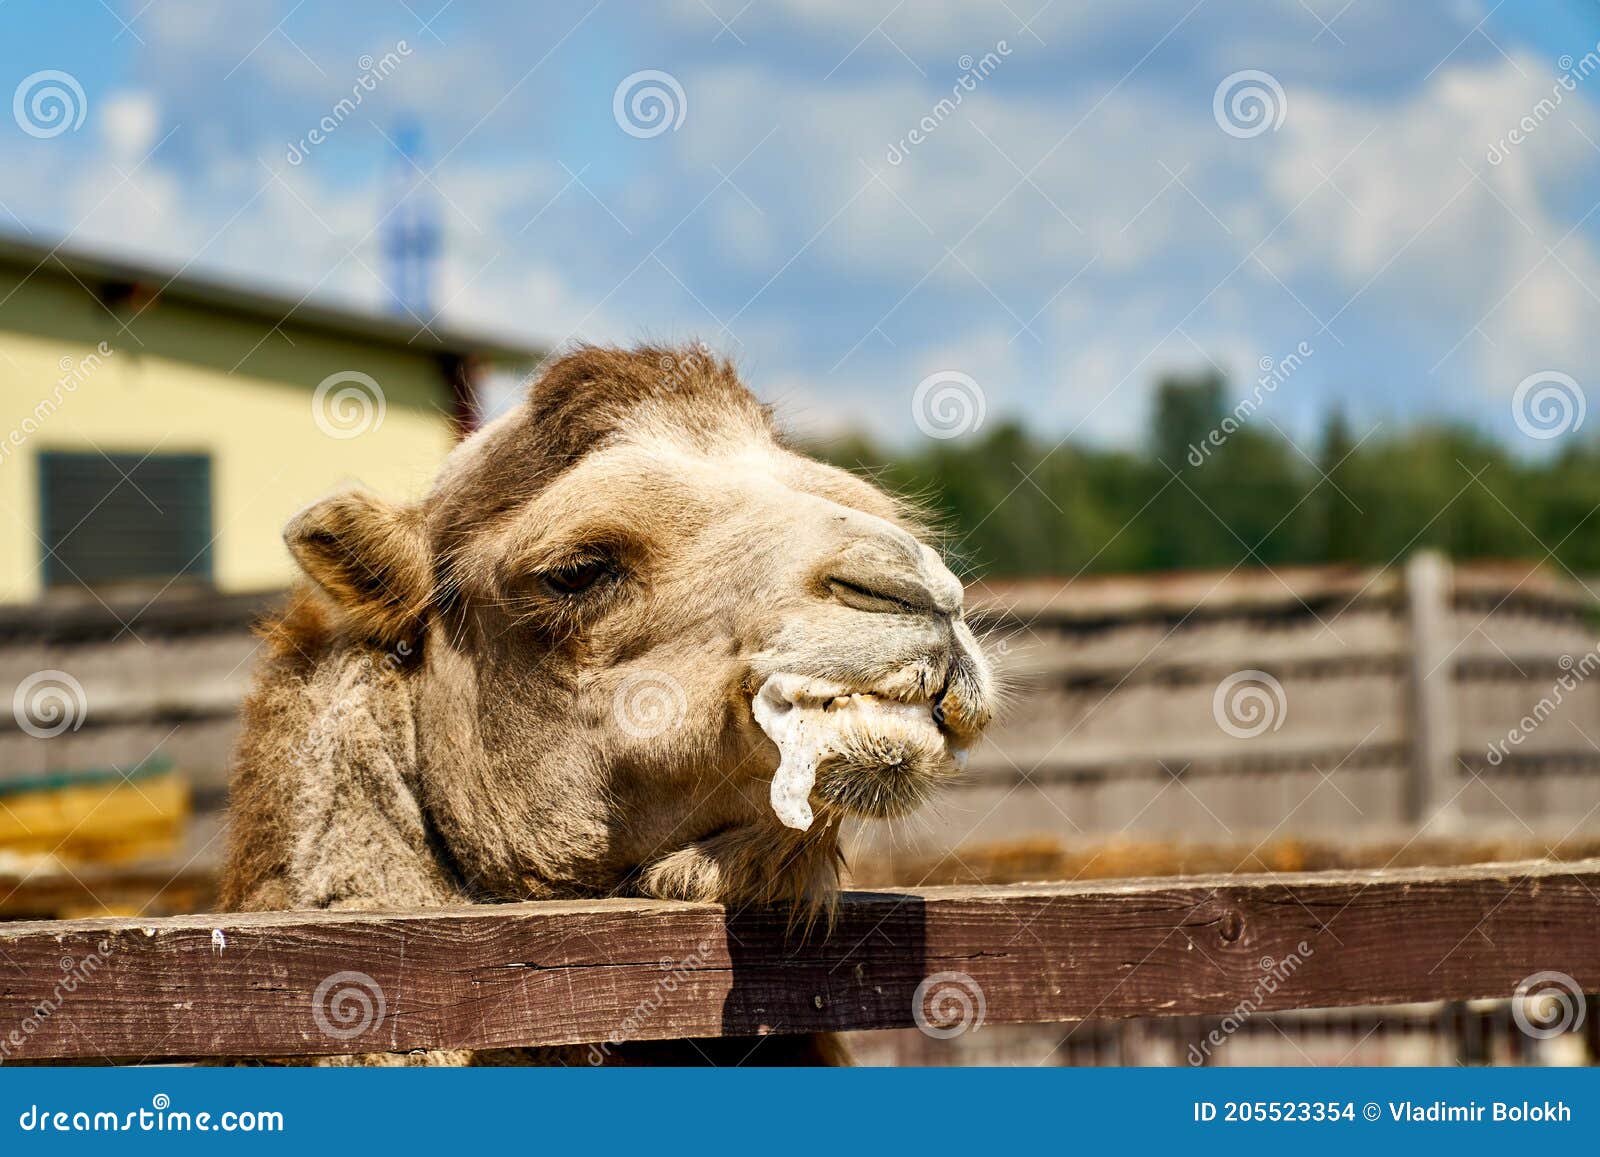 Camel at Zoo with Foam at Mouth. Animals Suffer in Zoo and Get Sick. Funny  Camel Stock Photo - Image of head, male: 205523354